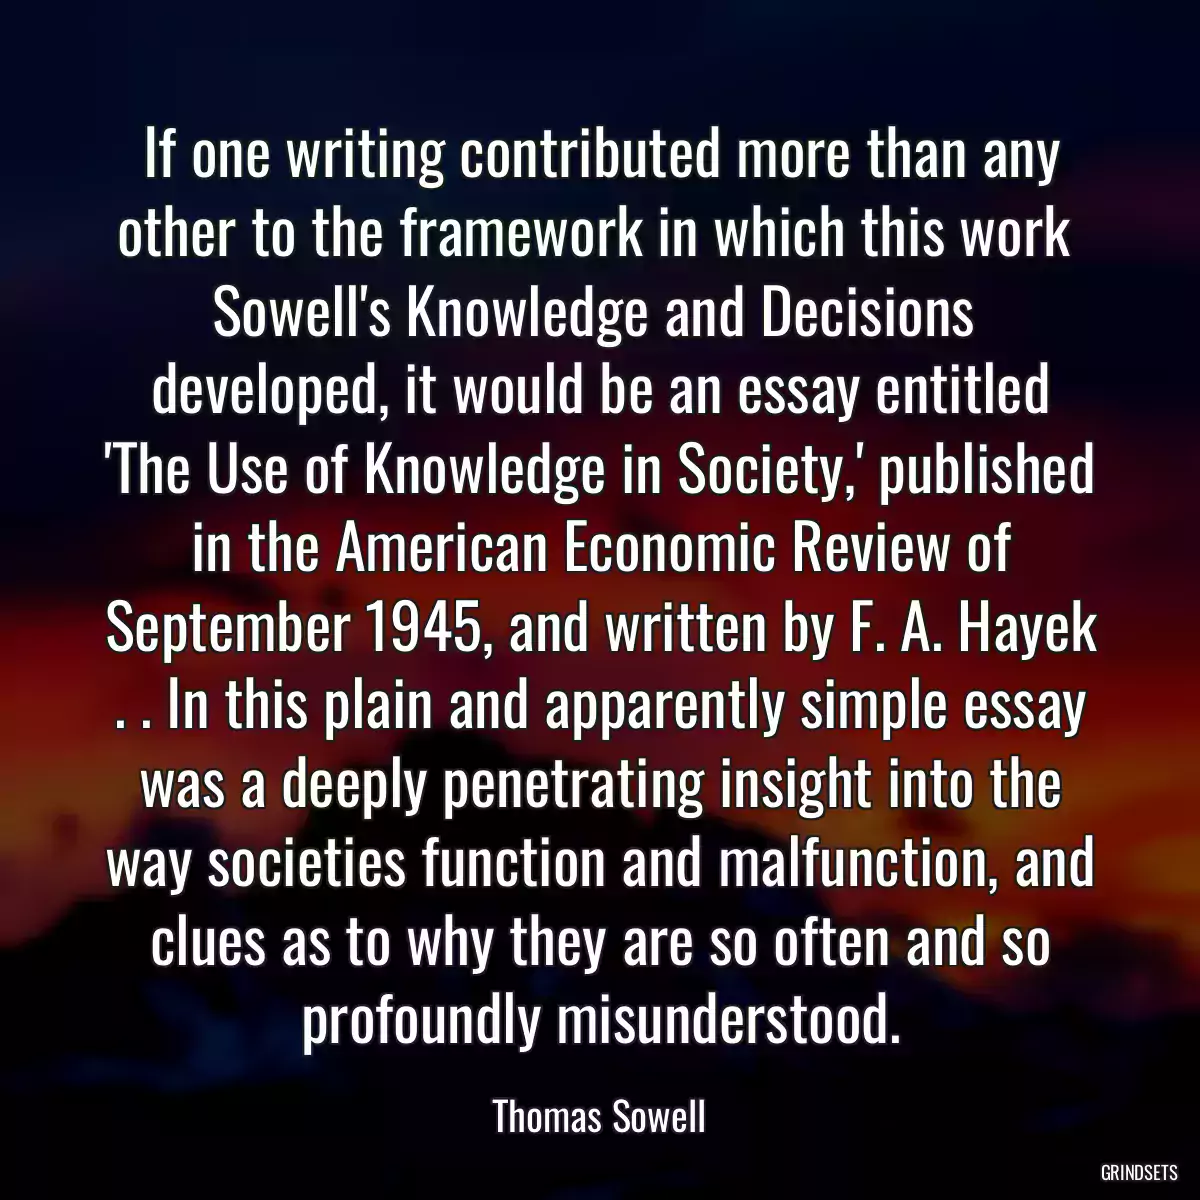 If one writing contributed more than any other to the framework in which this work  Sowell\'s Knowledge and Decisions  developed, it would be an essay entitled \'The Use of Knowledge in Society,\' published in the American Economic Review of September 1945, and written by F. A. Hayek . . In this plain and apparently simple essay was a deeply penetrating insight into the way societies function and malfunction, and clues as to why they are so often and so profoundly misunderstood.